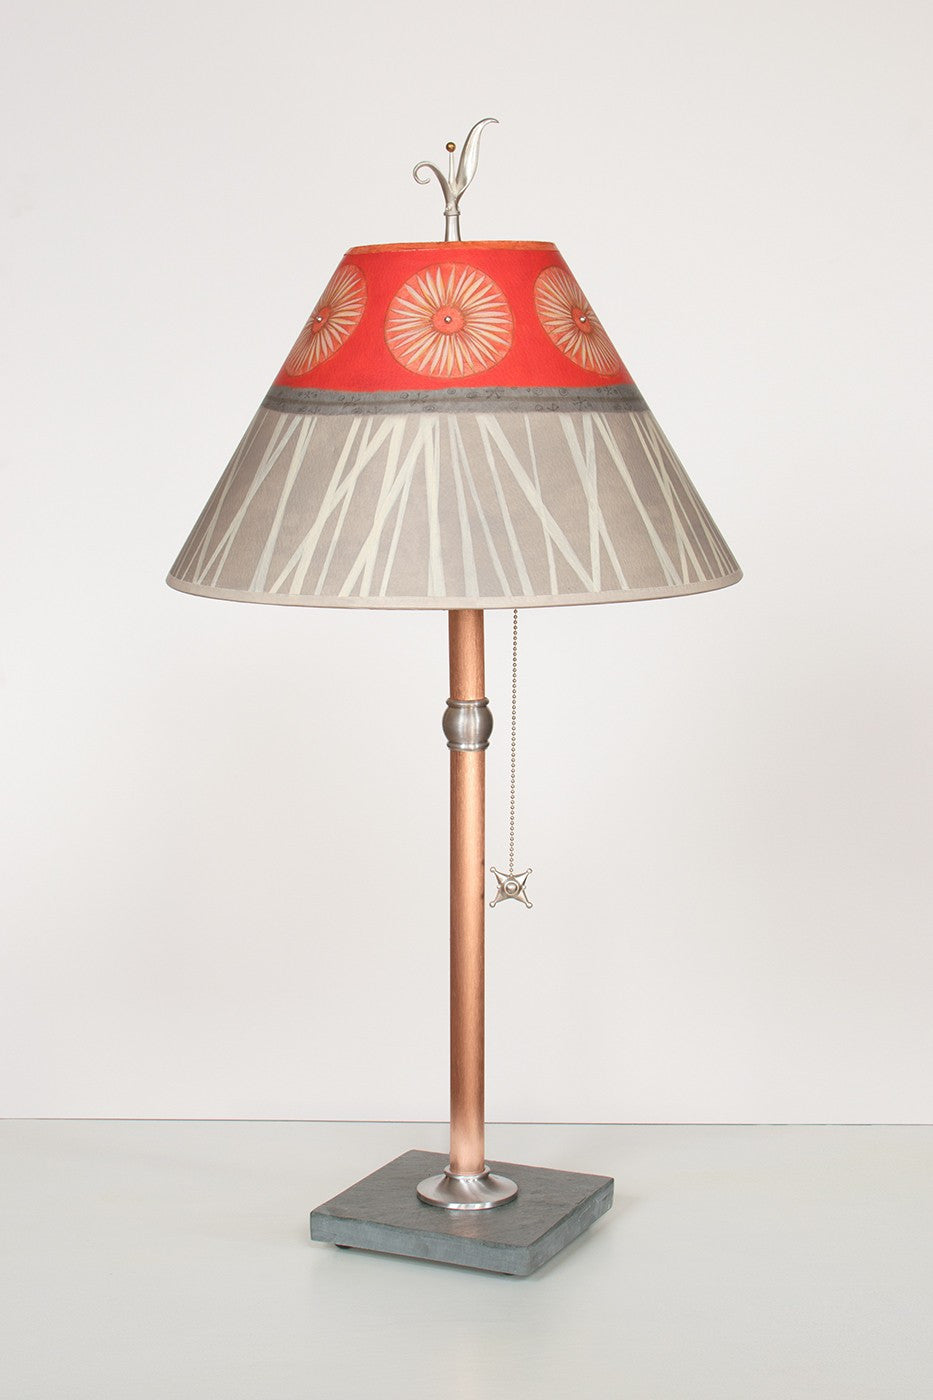 Copper Table Lamp with Medium Conical-Shade in "Tang" Design - True North Gallery